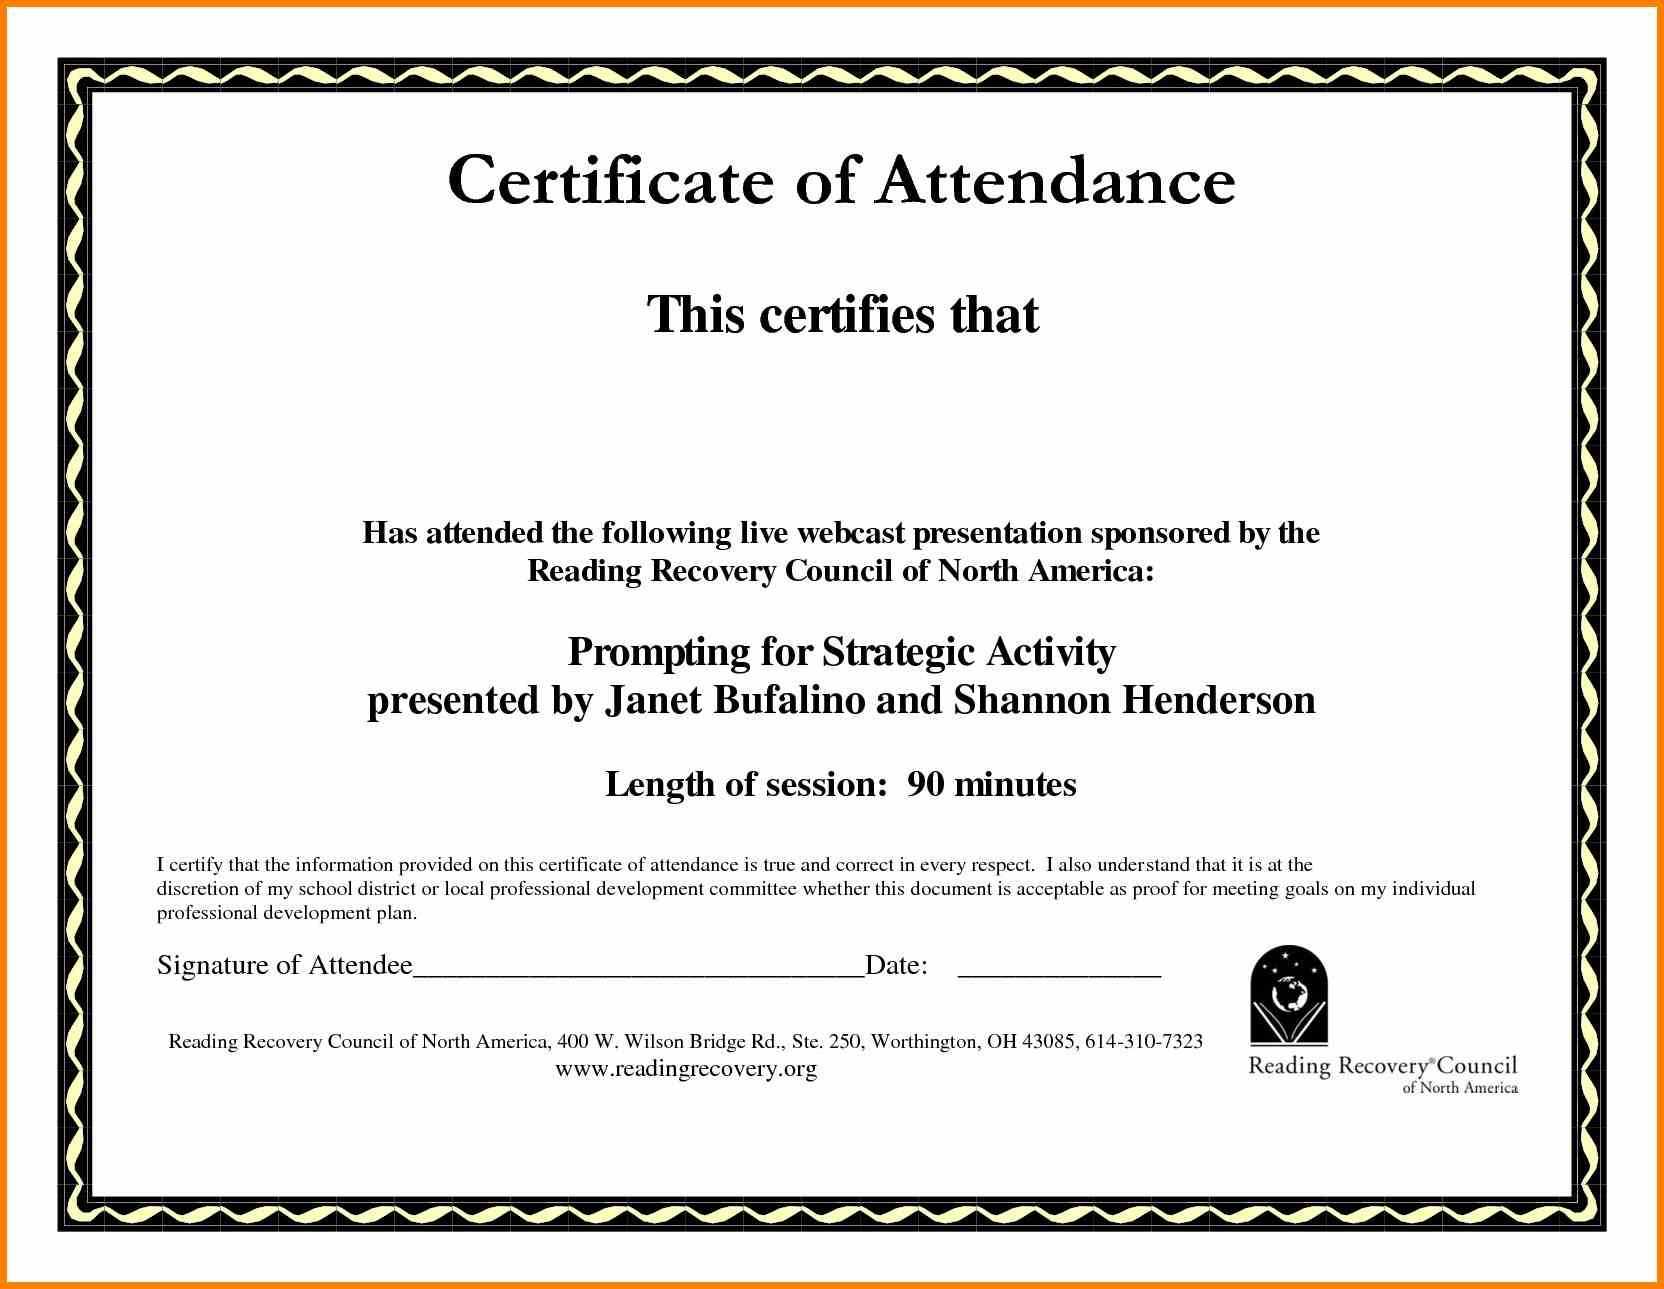 Certificate Of Attendance Template Word Ukran Agdiffusion Regarding Conference Certificate Of Attendance Template